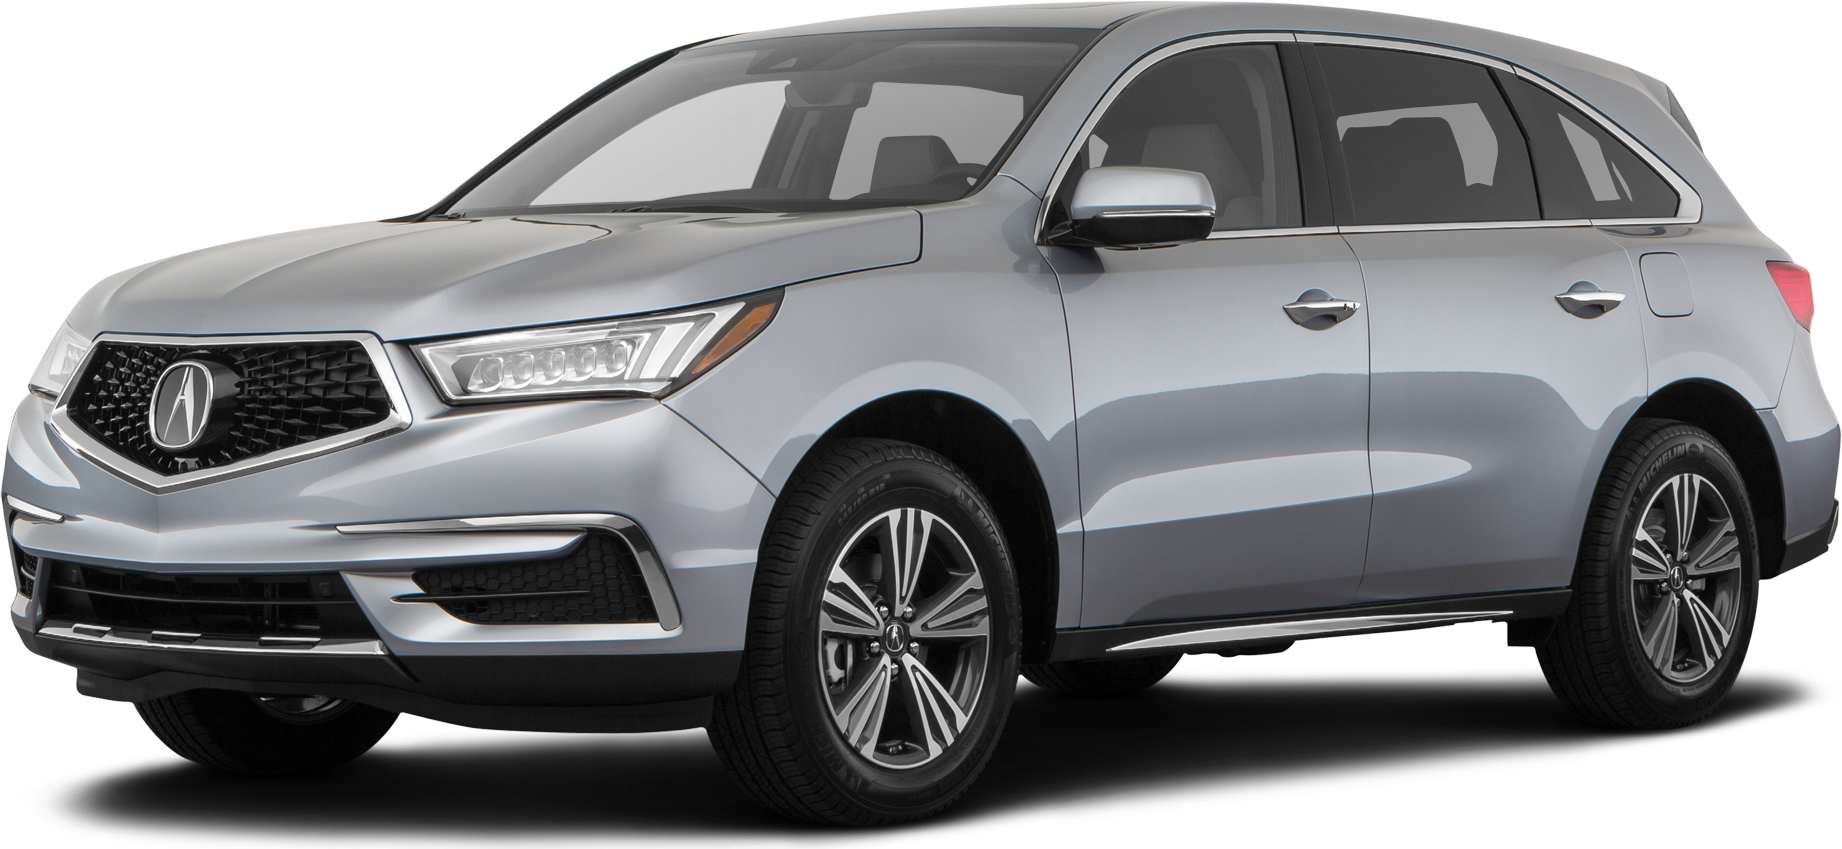 2018 Acura Mdx Price Value Ratings And Reviews Kelley Blue Book